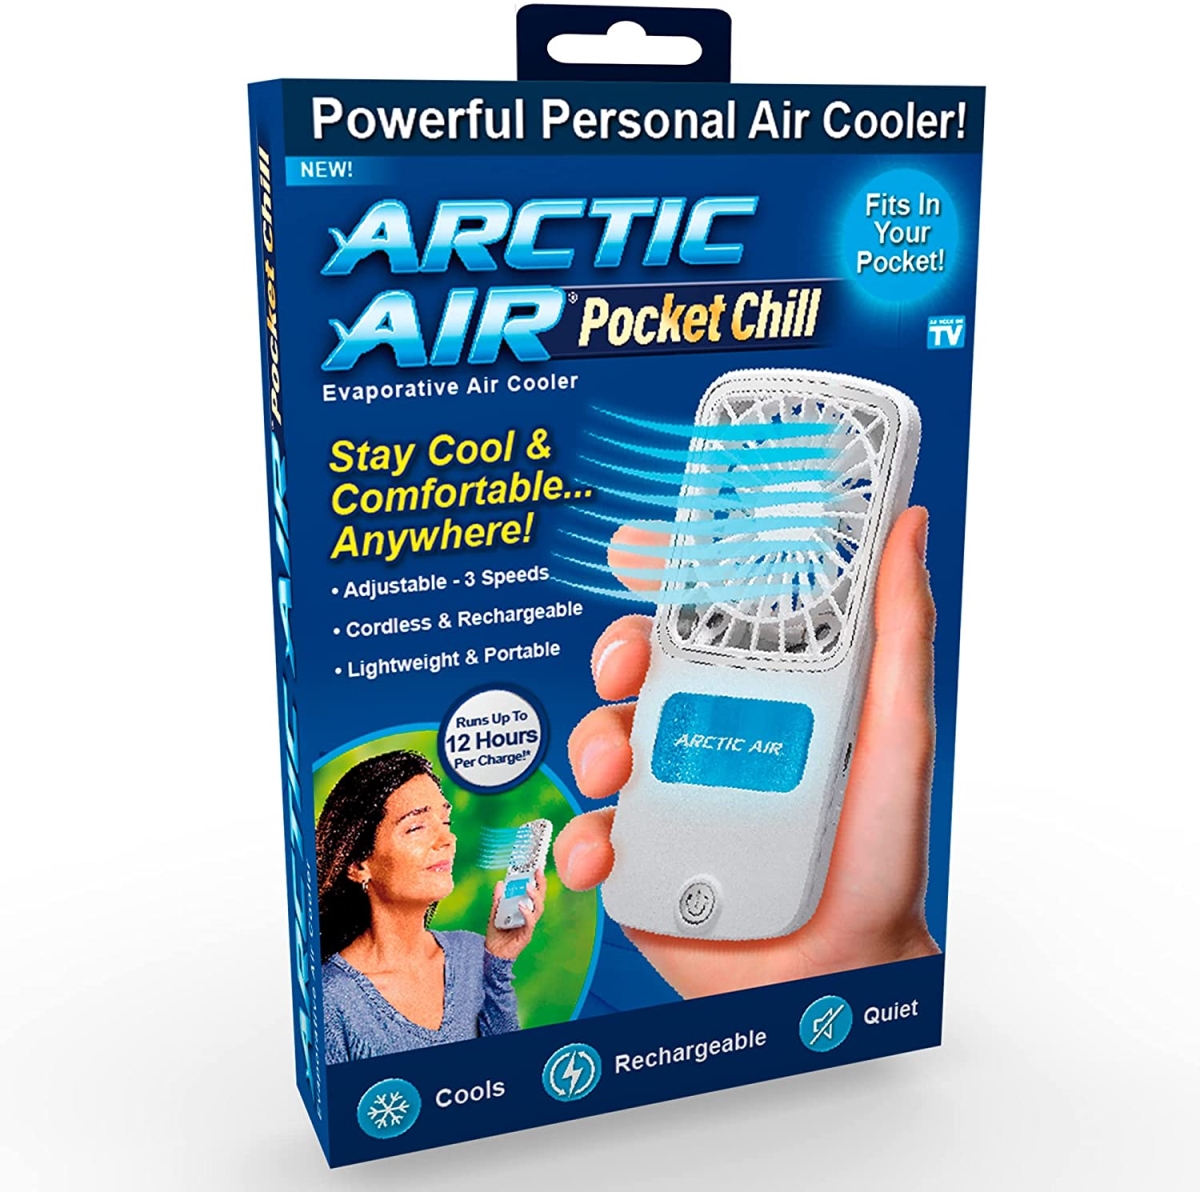 Picture of Ontel Products 105039 Arctic Air Pocket Chill Personal Air Cooler